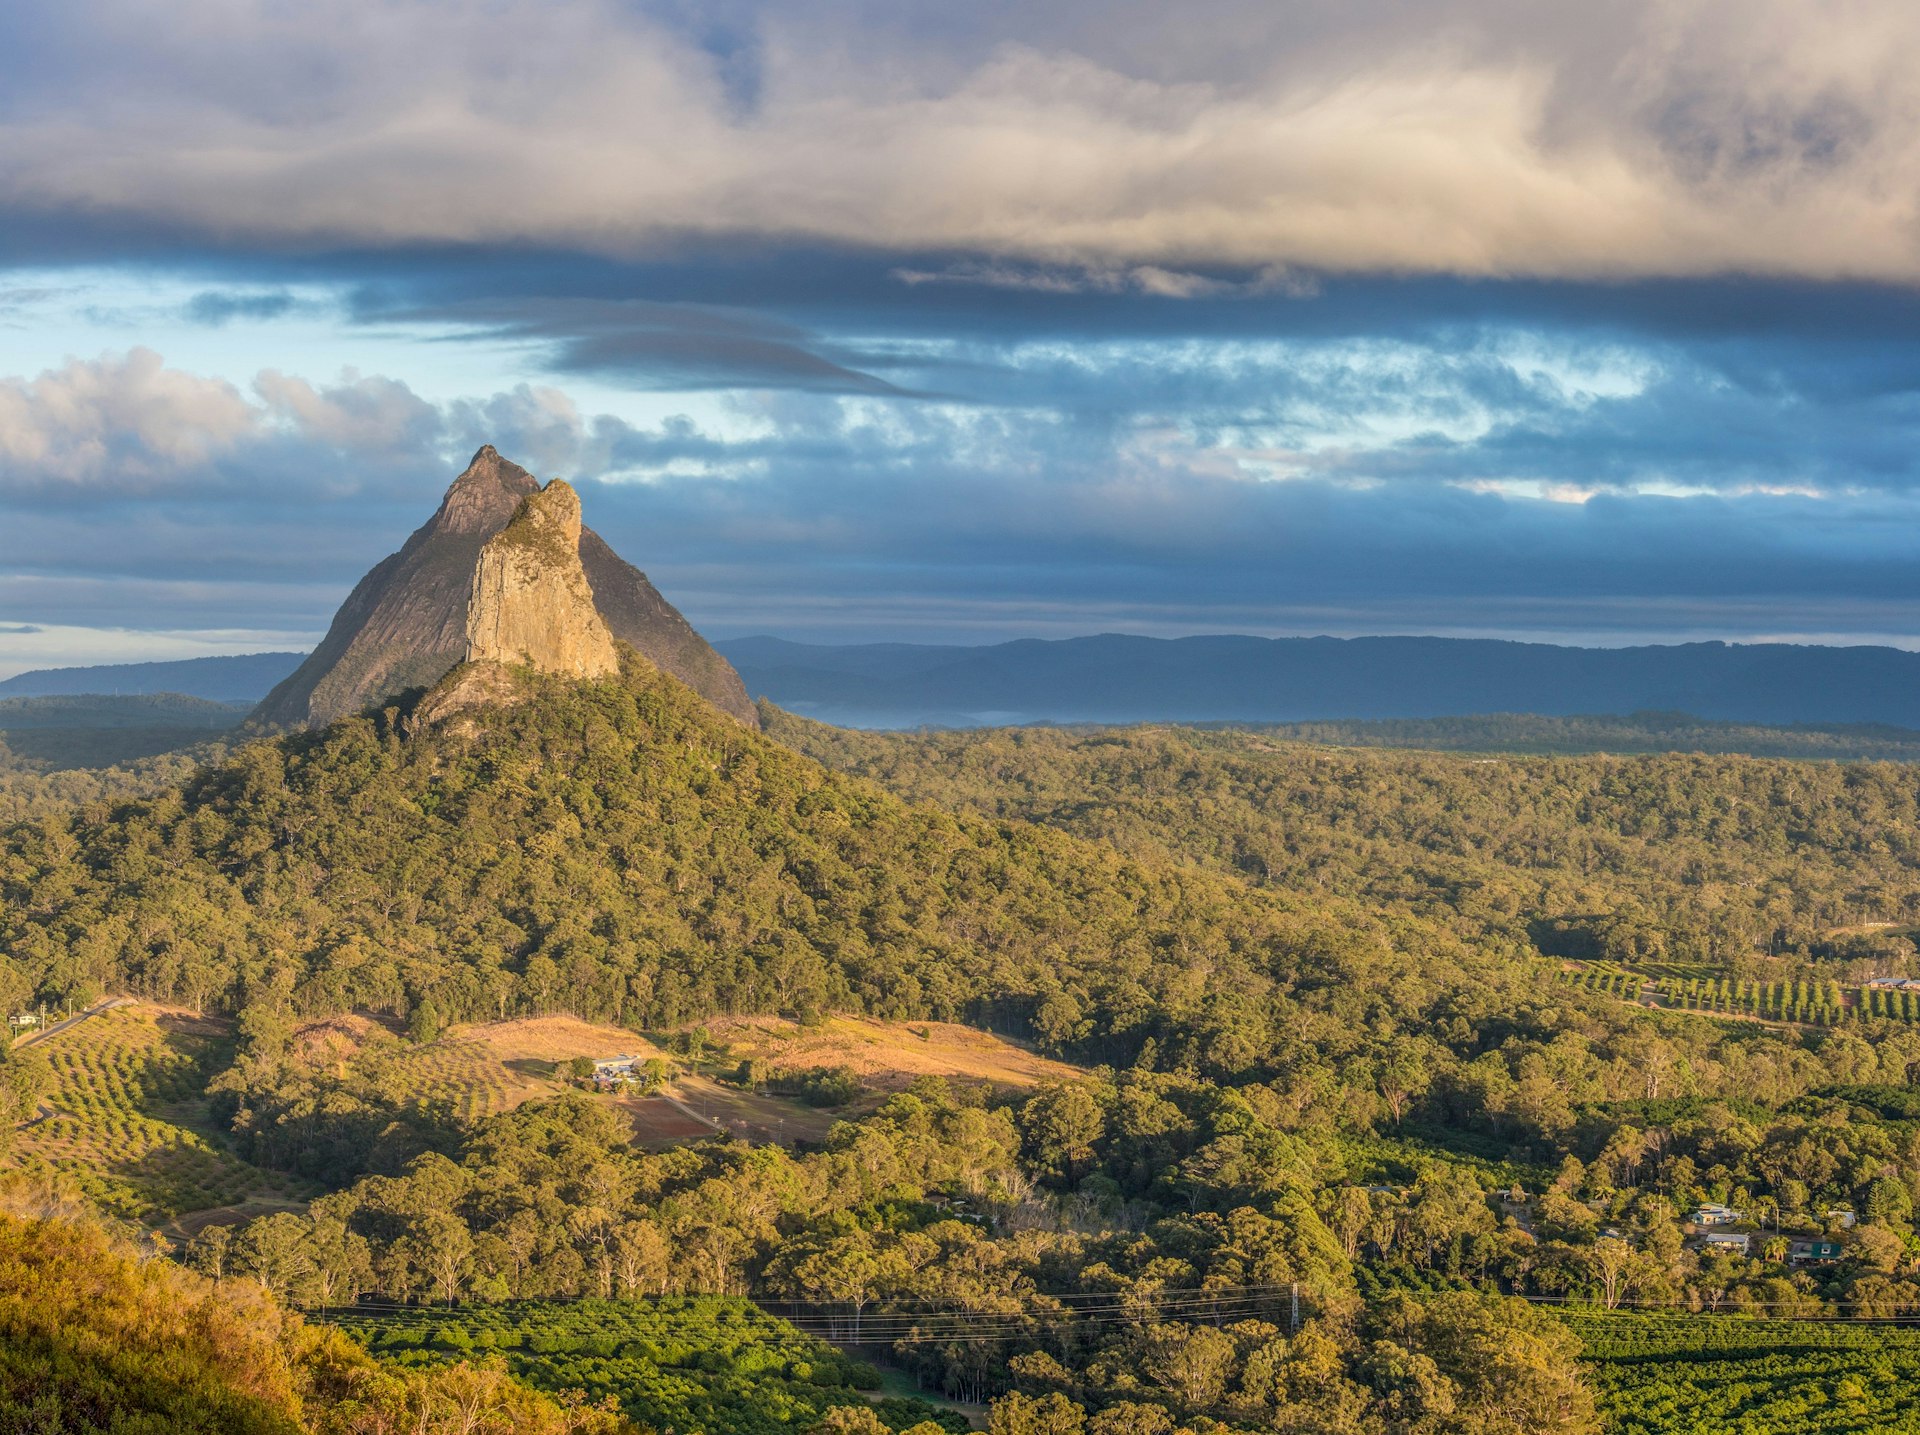 Rising pointedly out of a sea of forest and into a moody sky of dark clouds, pulled like cotton candy across a blue sky, is a rocky volcanic plug in Brisbane's Hinterland; like patches on a quilt, there are a few orchards within the foreground sections of forest